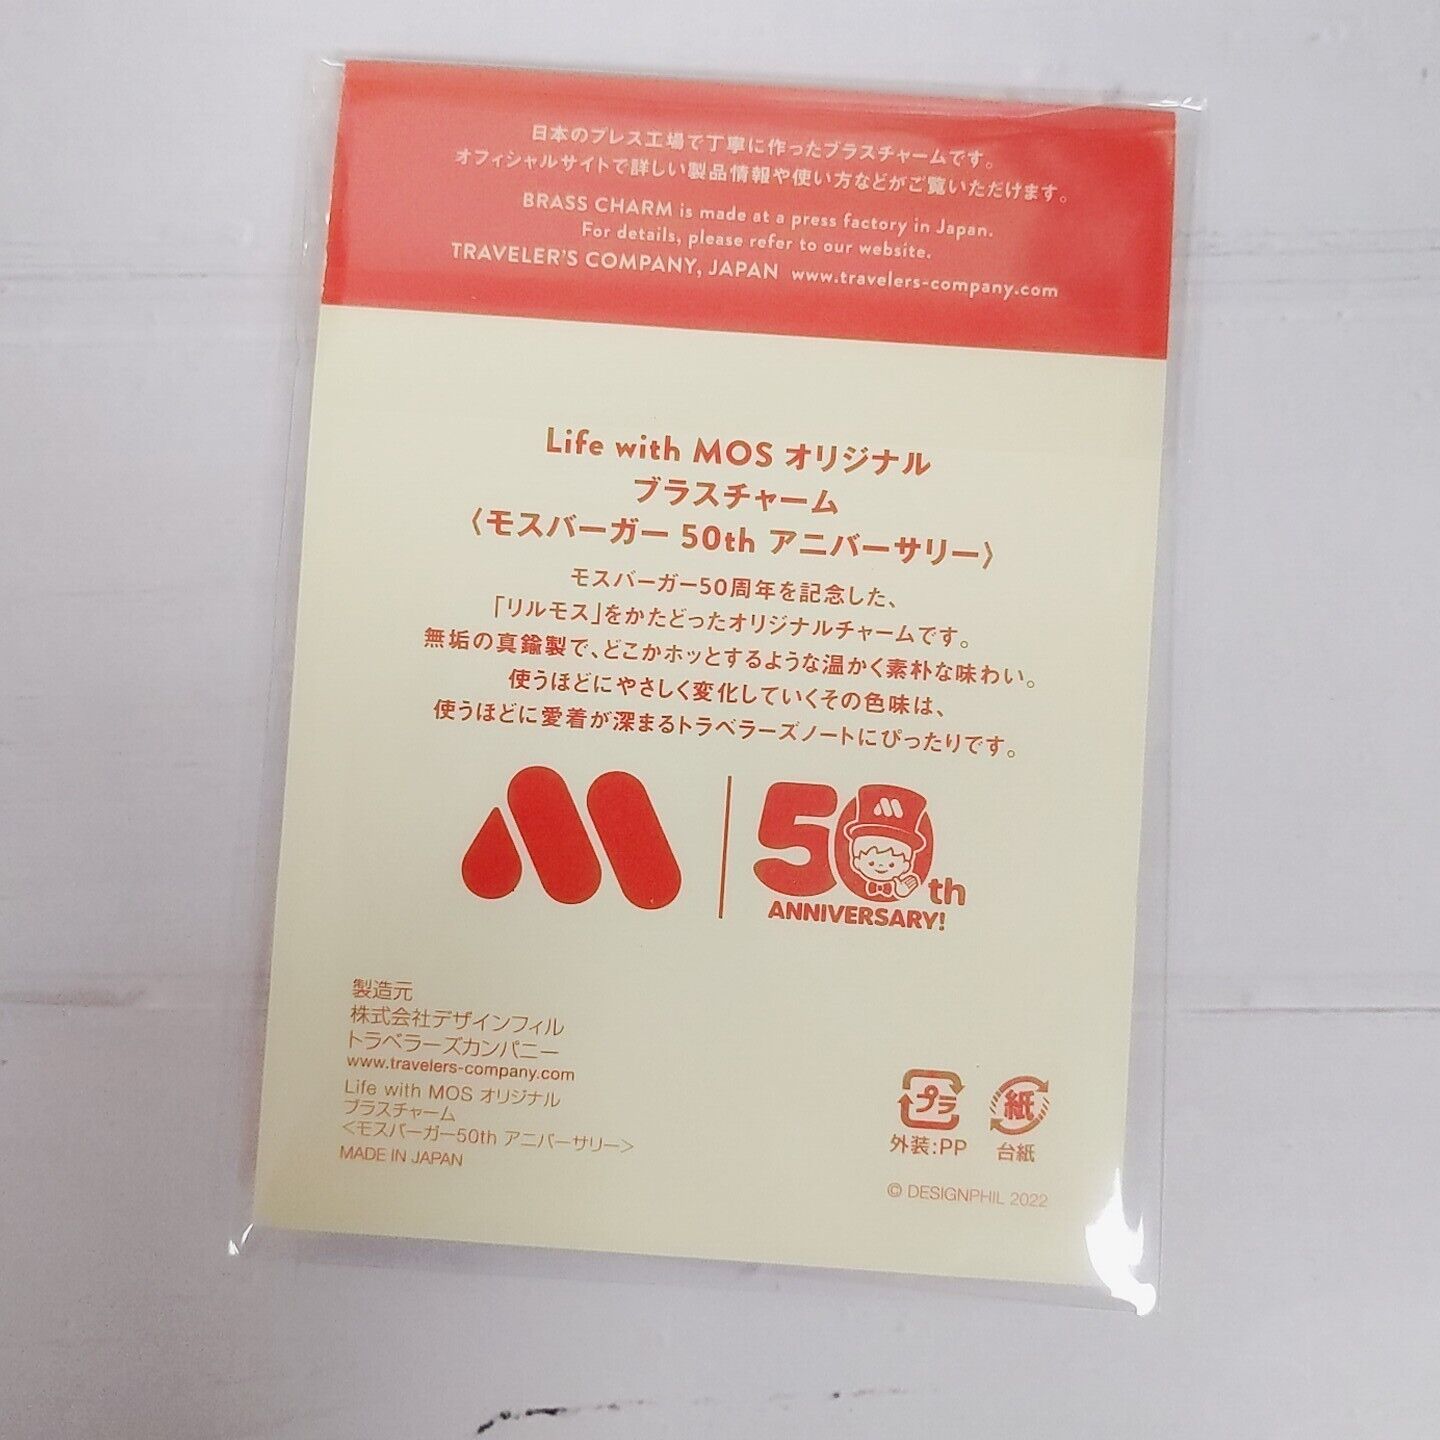 Life with MOS BURGER 50th Traveler’s company traveler's notebook モスバーガー 50th